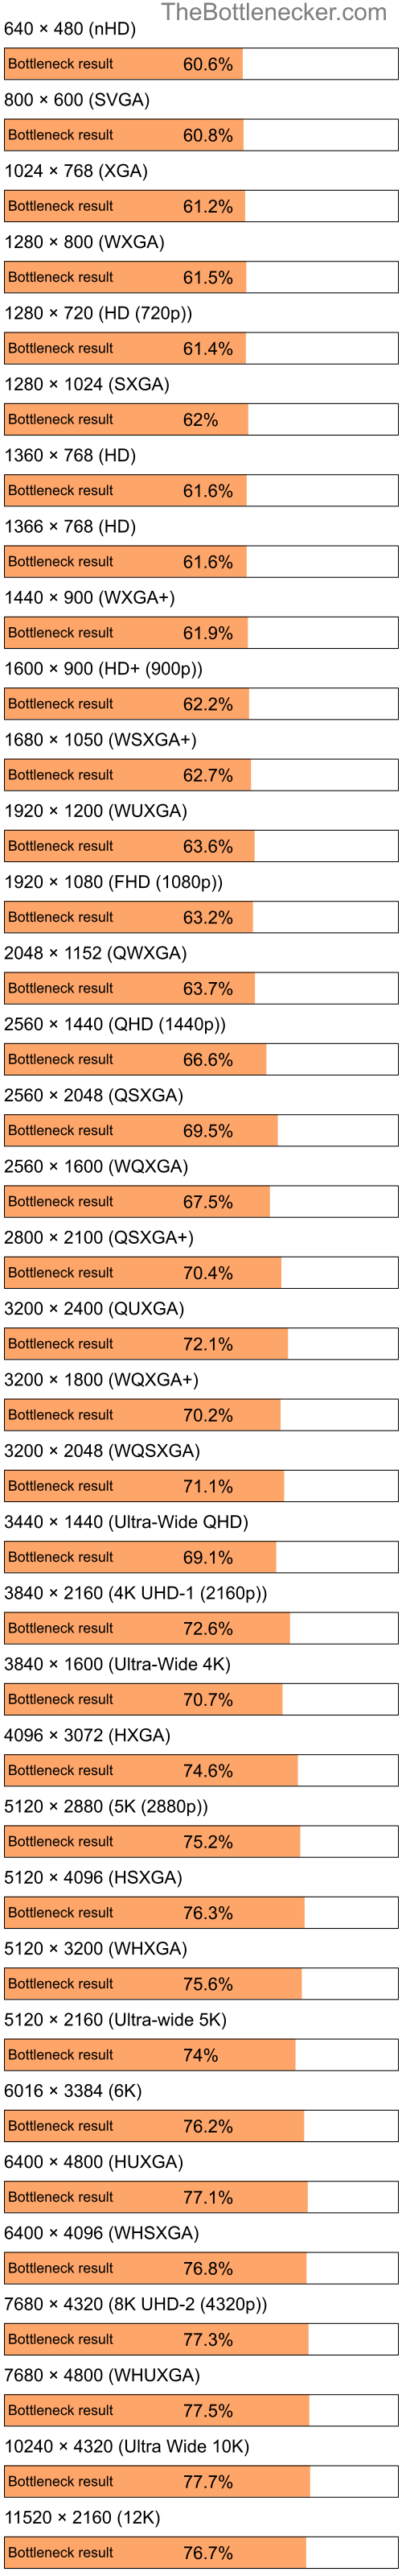 Bottleneck results by resolution for Intel Pentium 4 and NVIDIA GeForce 210 in7 Days to Die